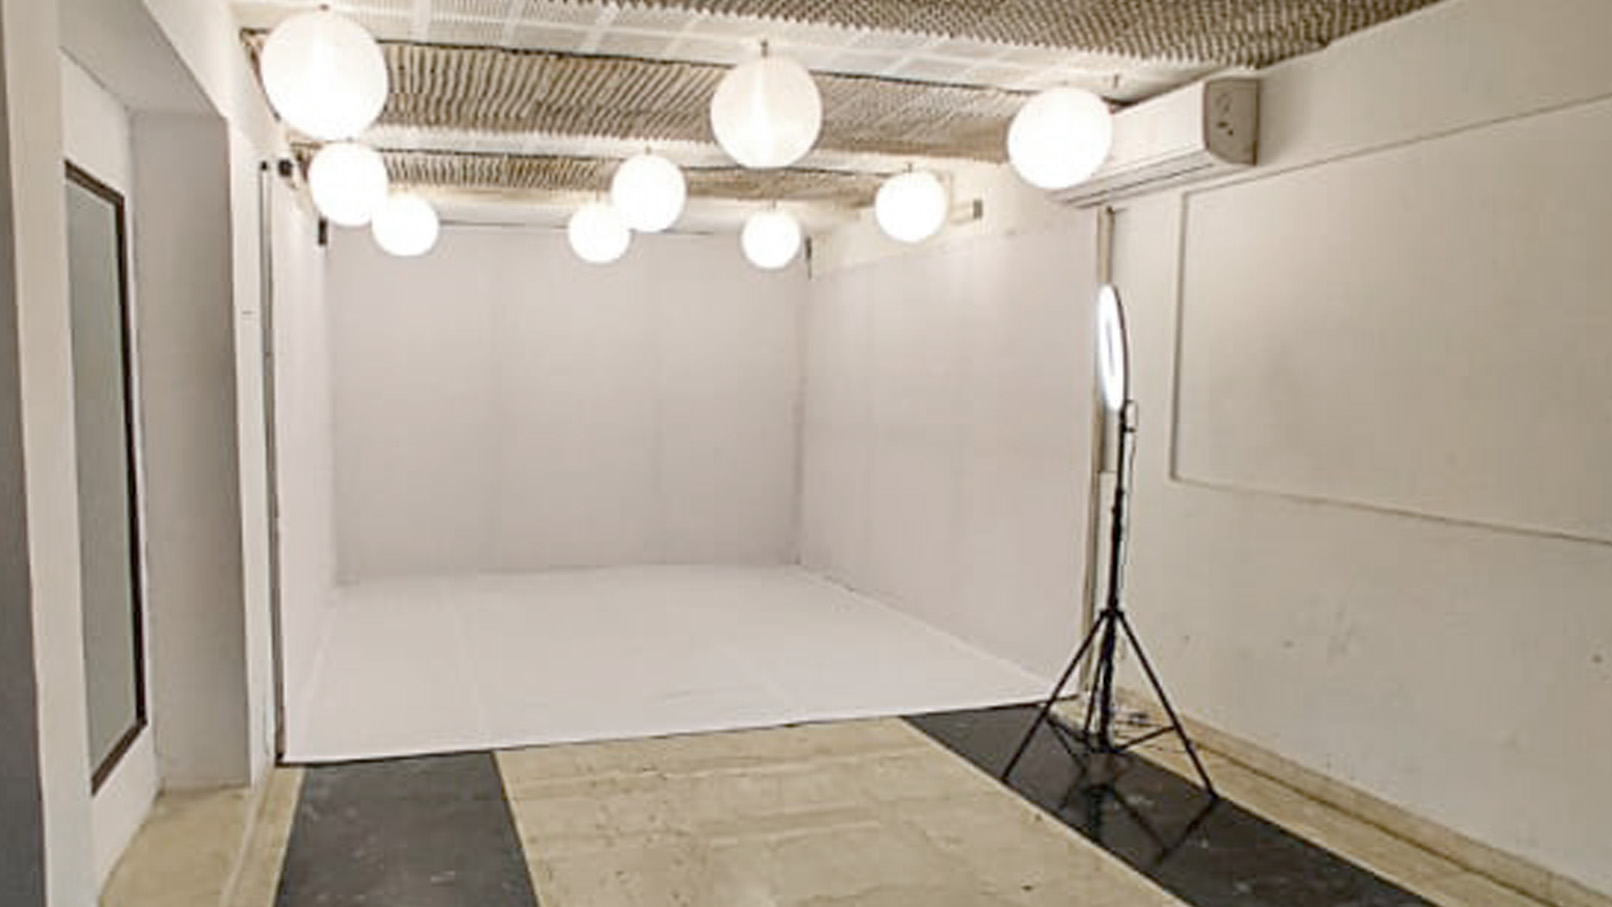 white cyclorama studio for video production in new delhi Ncr.